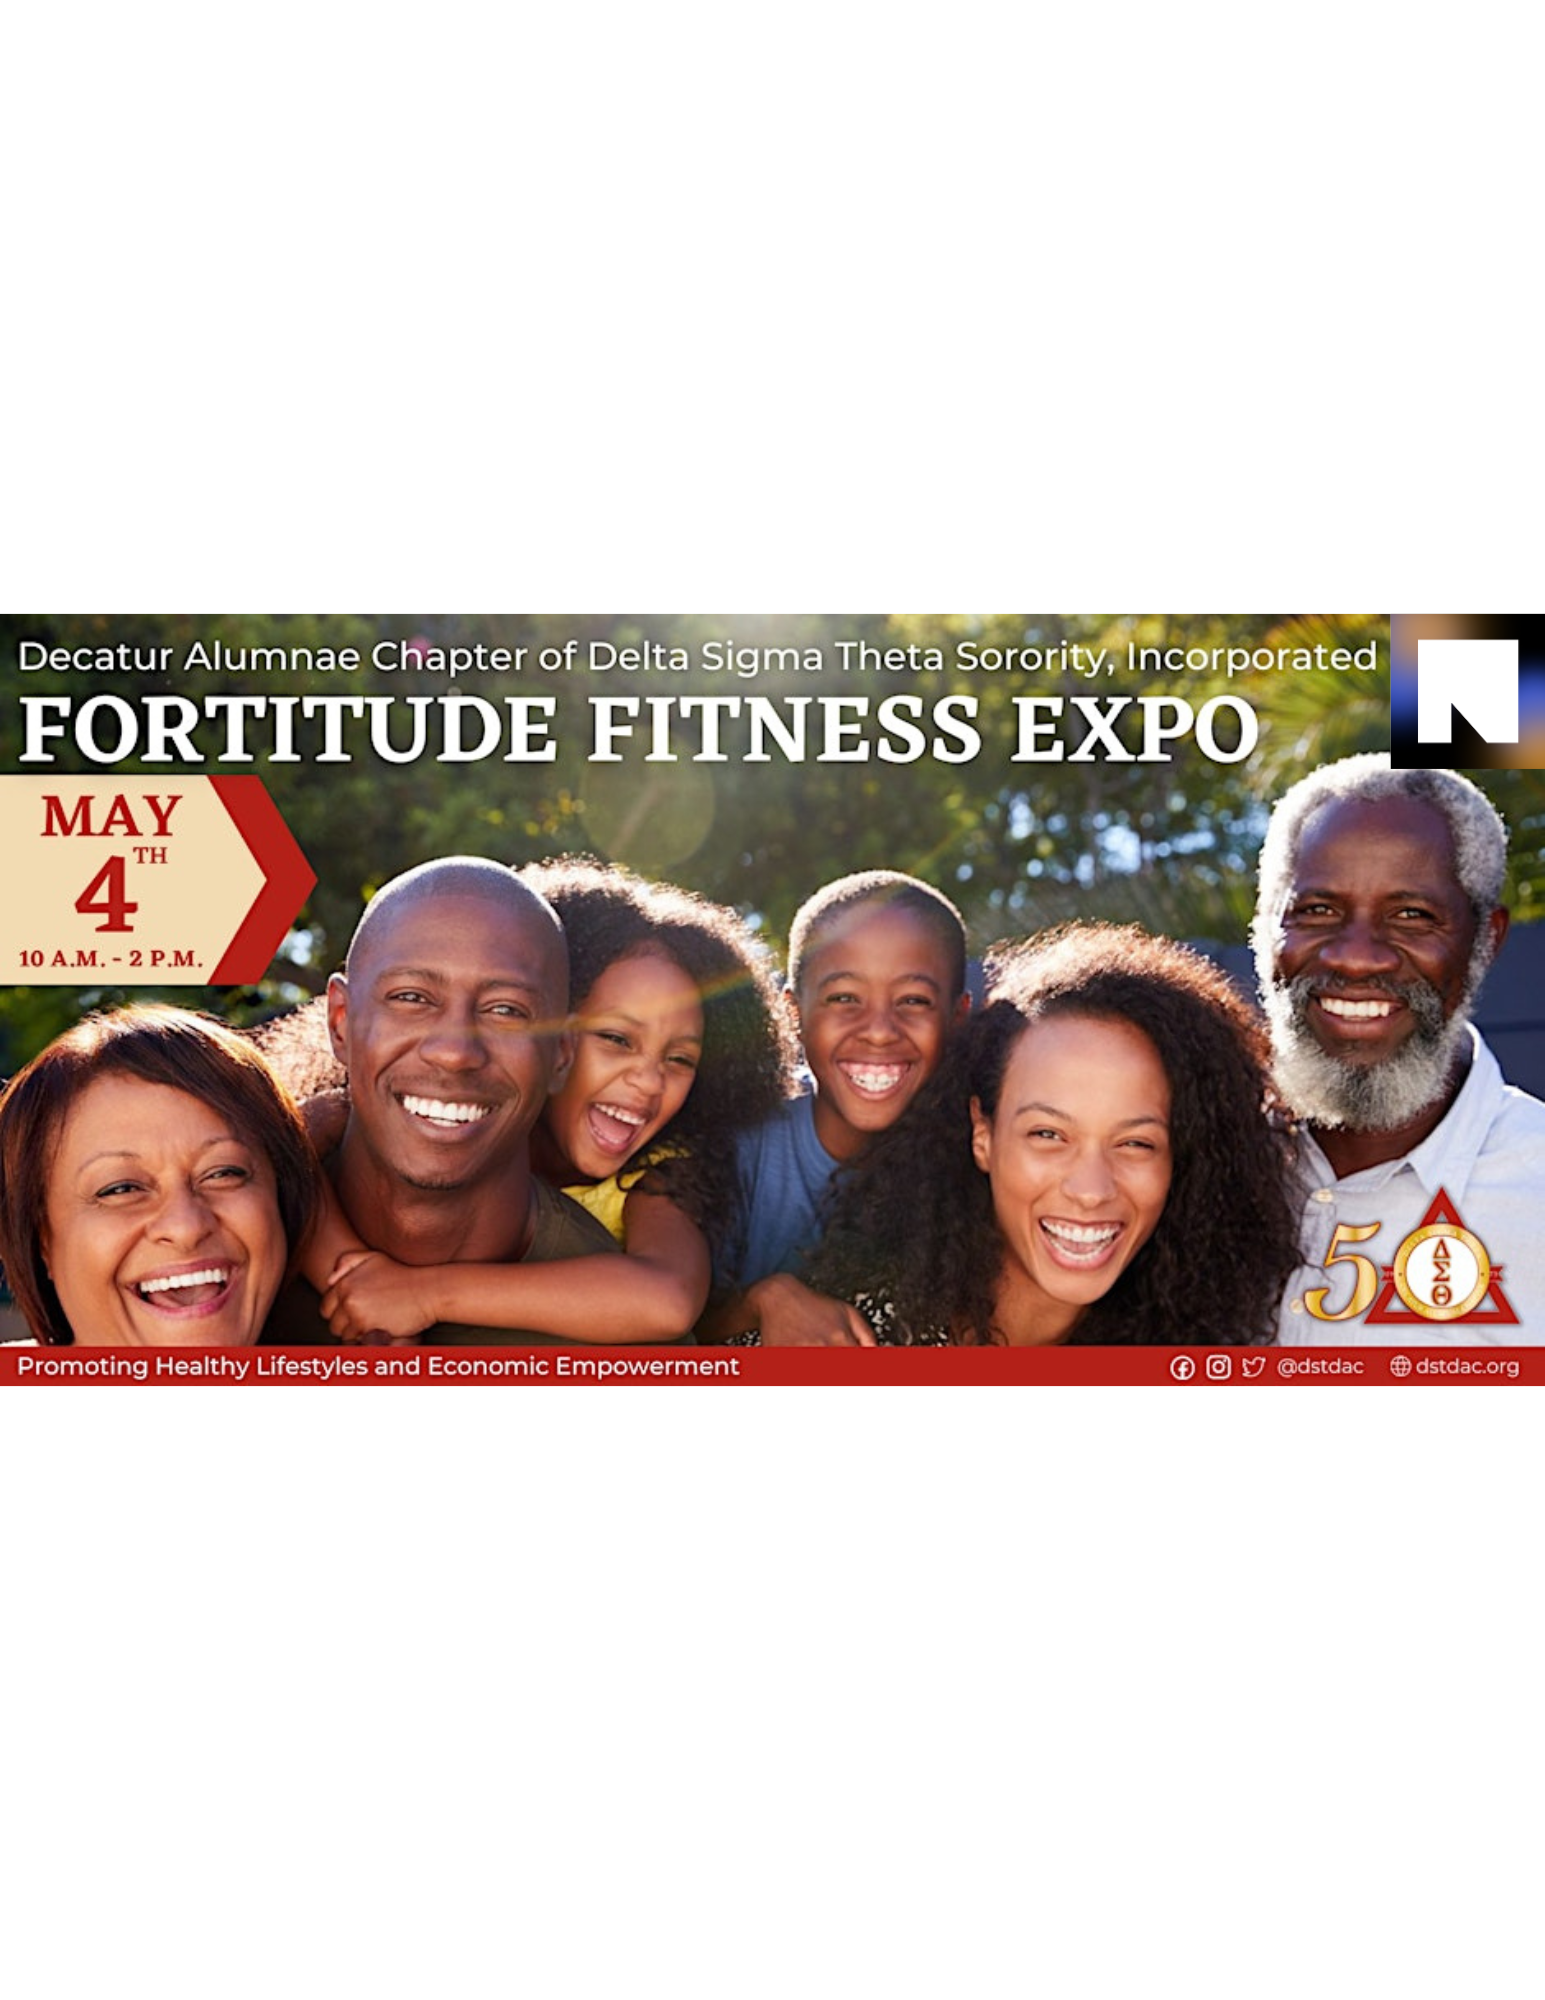 Fortitude Fitness Expo